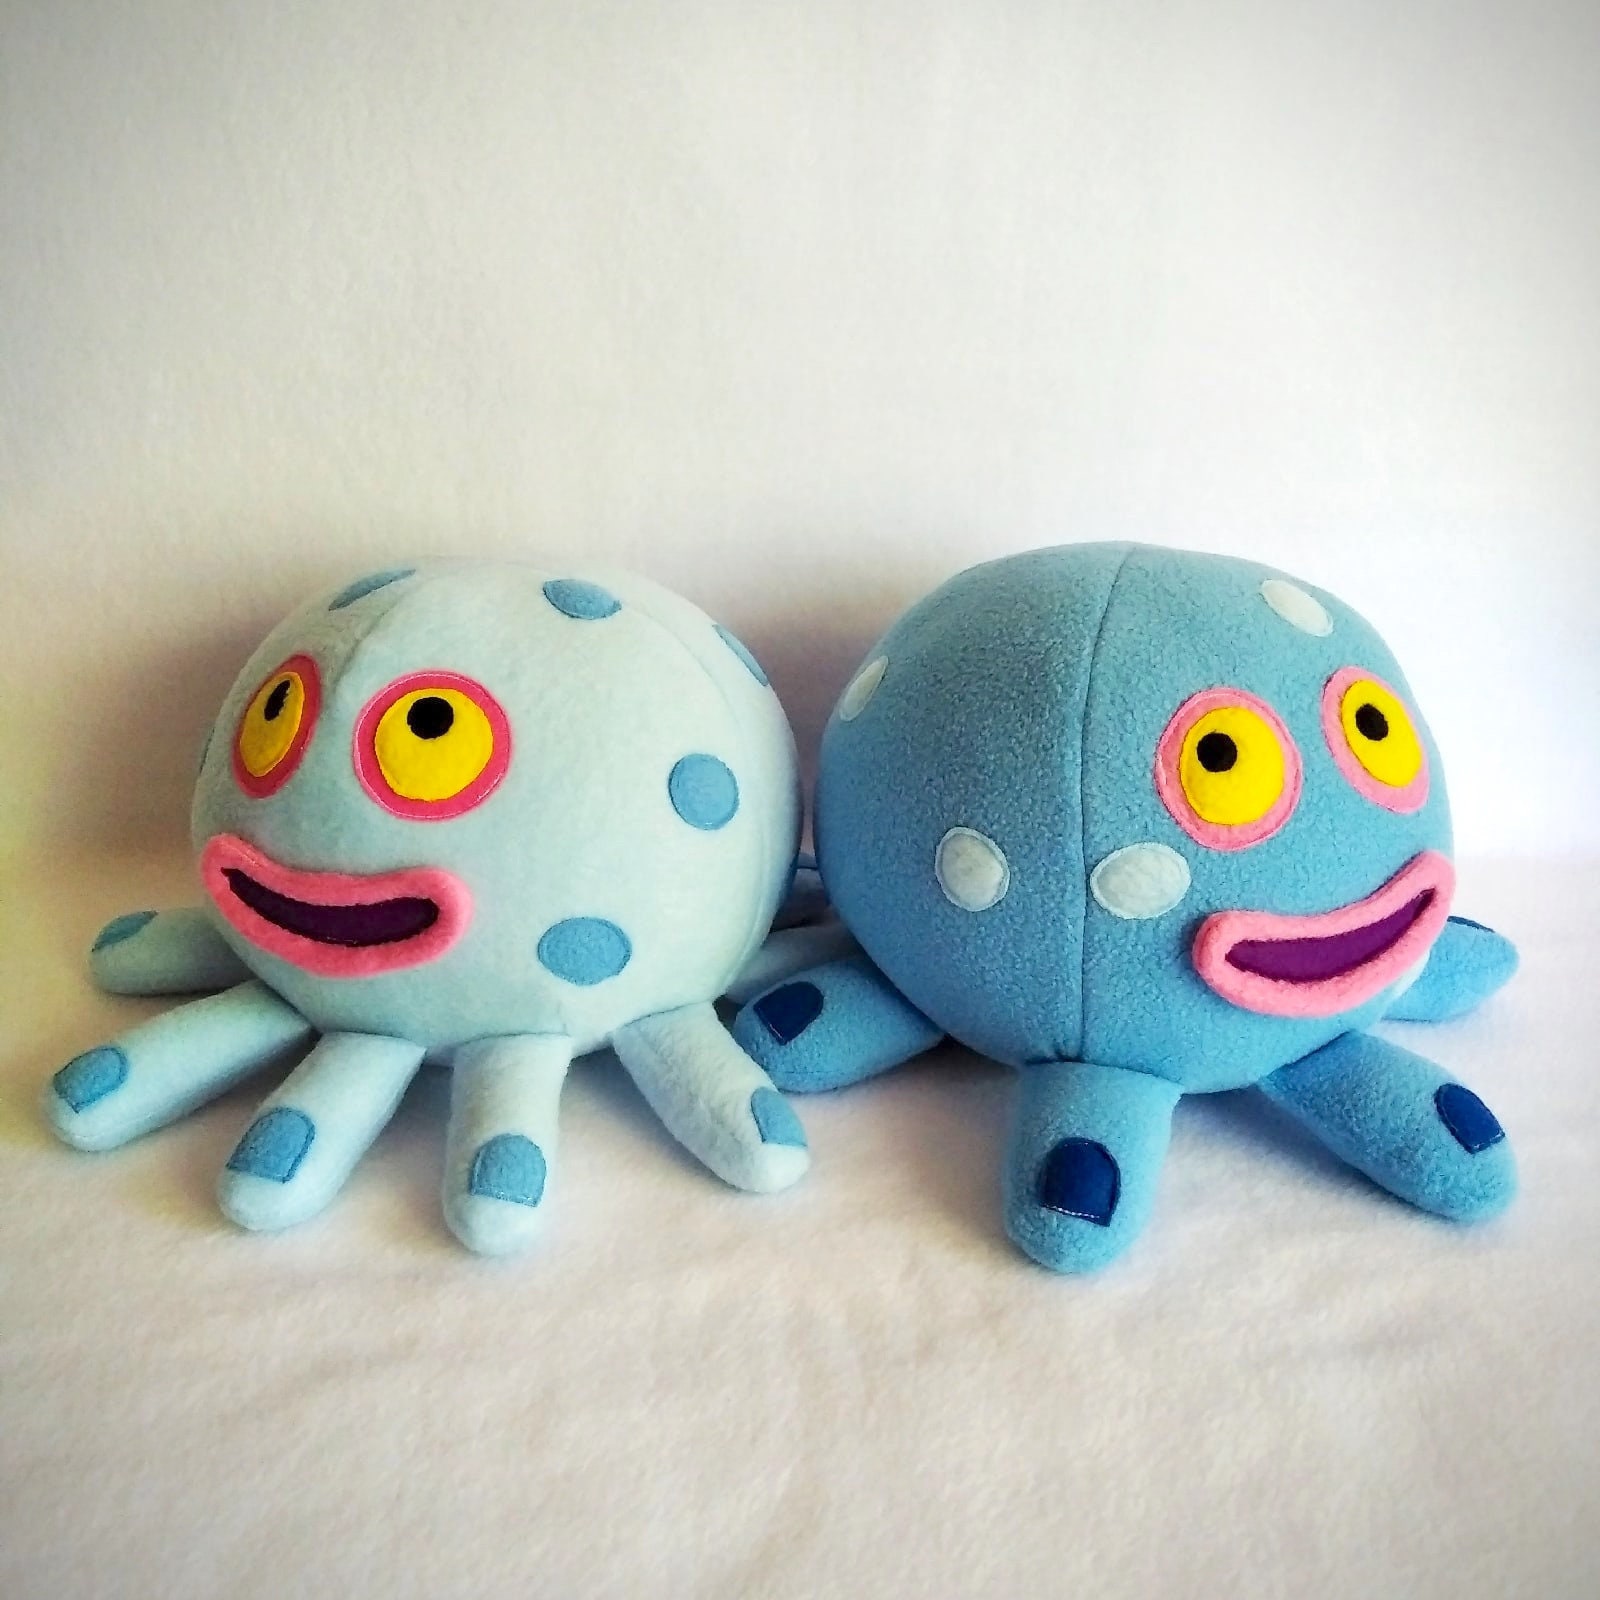 My Singing Monsters Cuddly Toys: Sing Along in Style